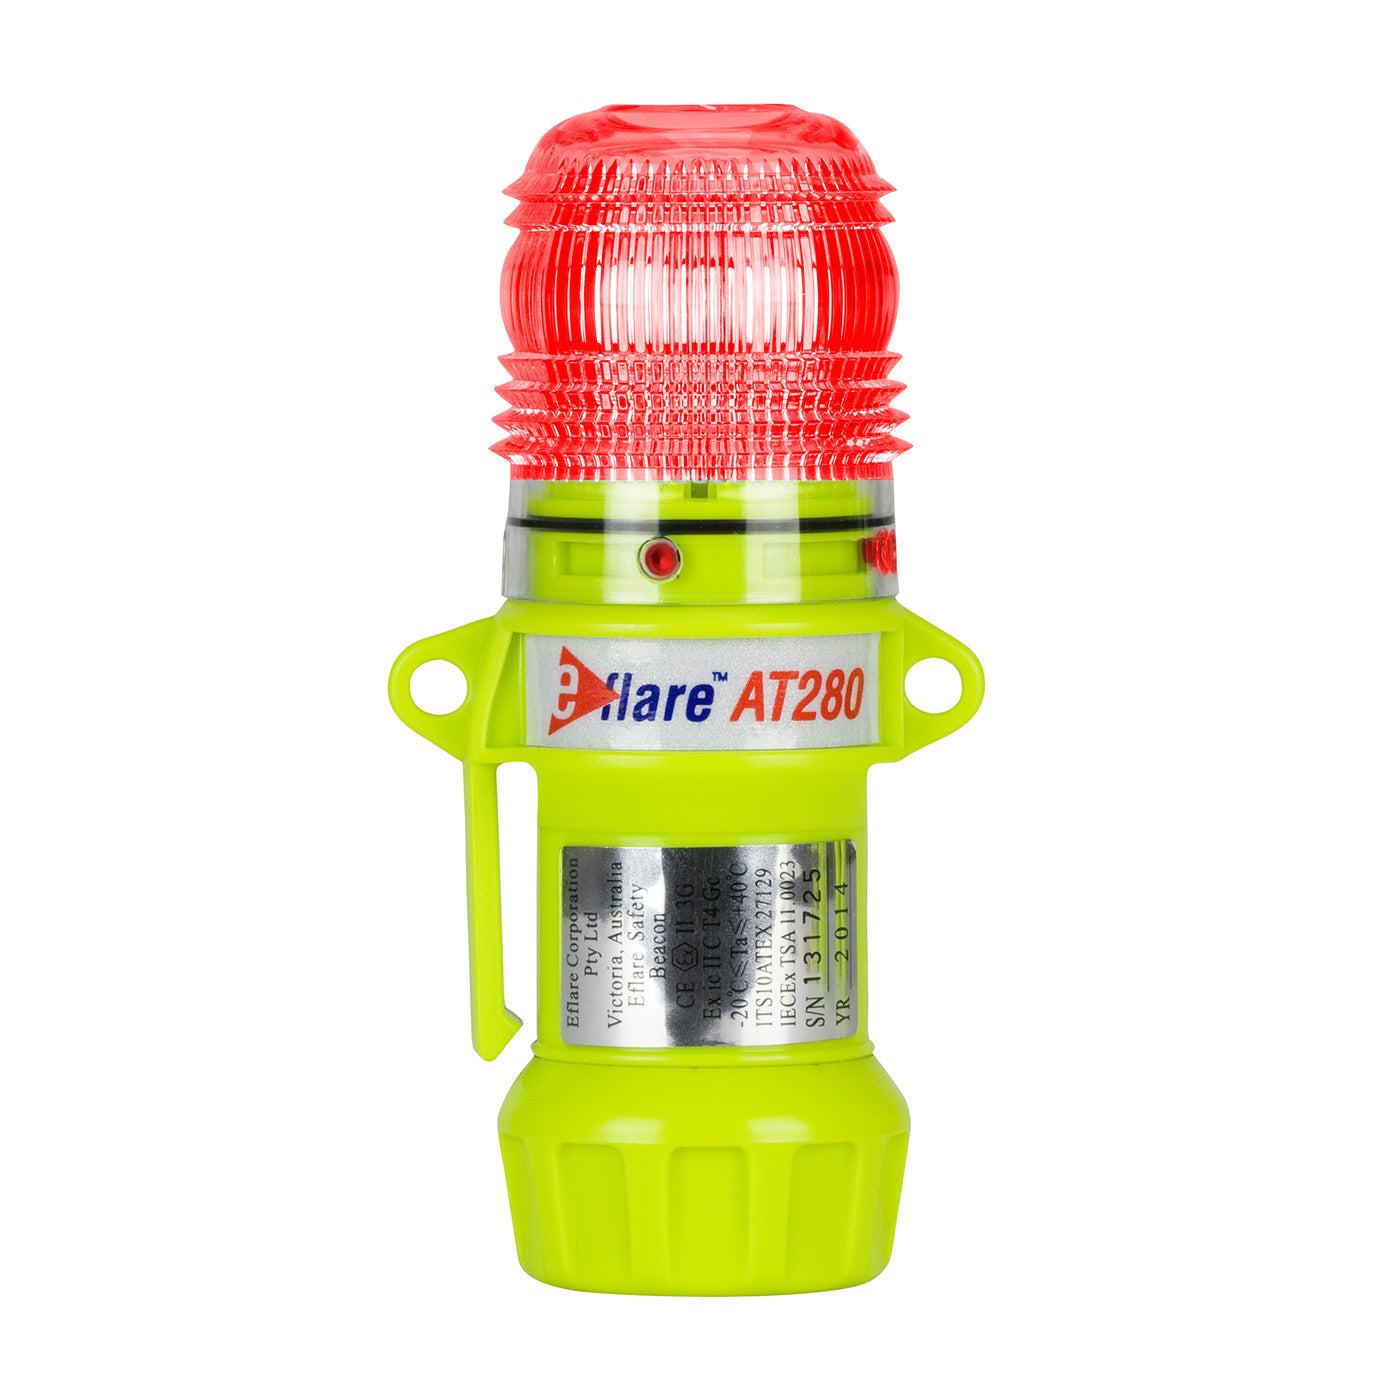 Protective Industrial Products-E-FLARE COMPACT SAFETY & EMERGENCY BEACON